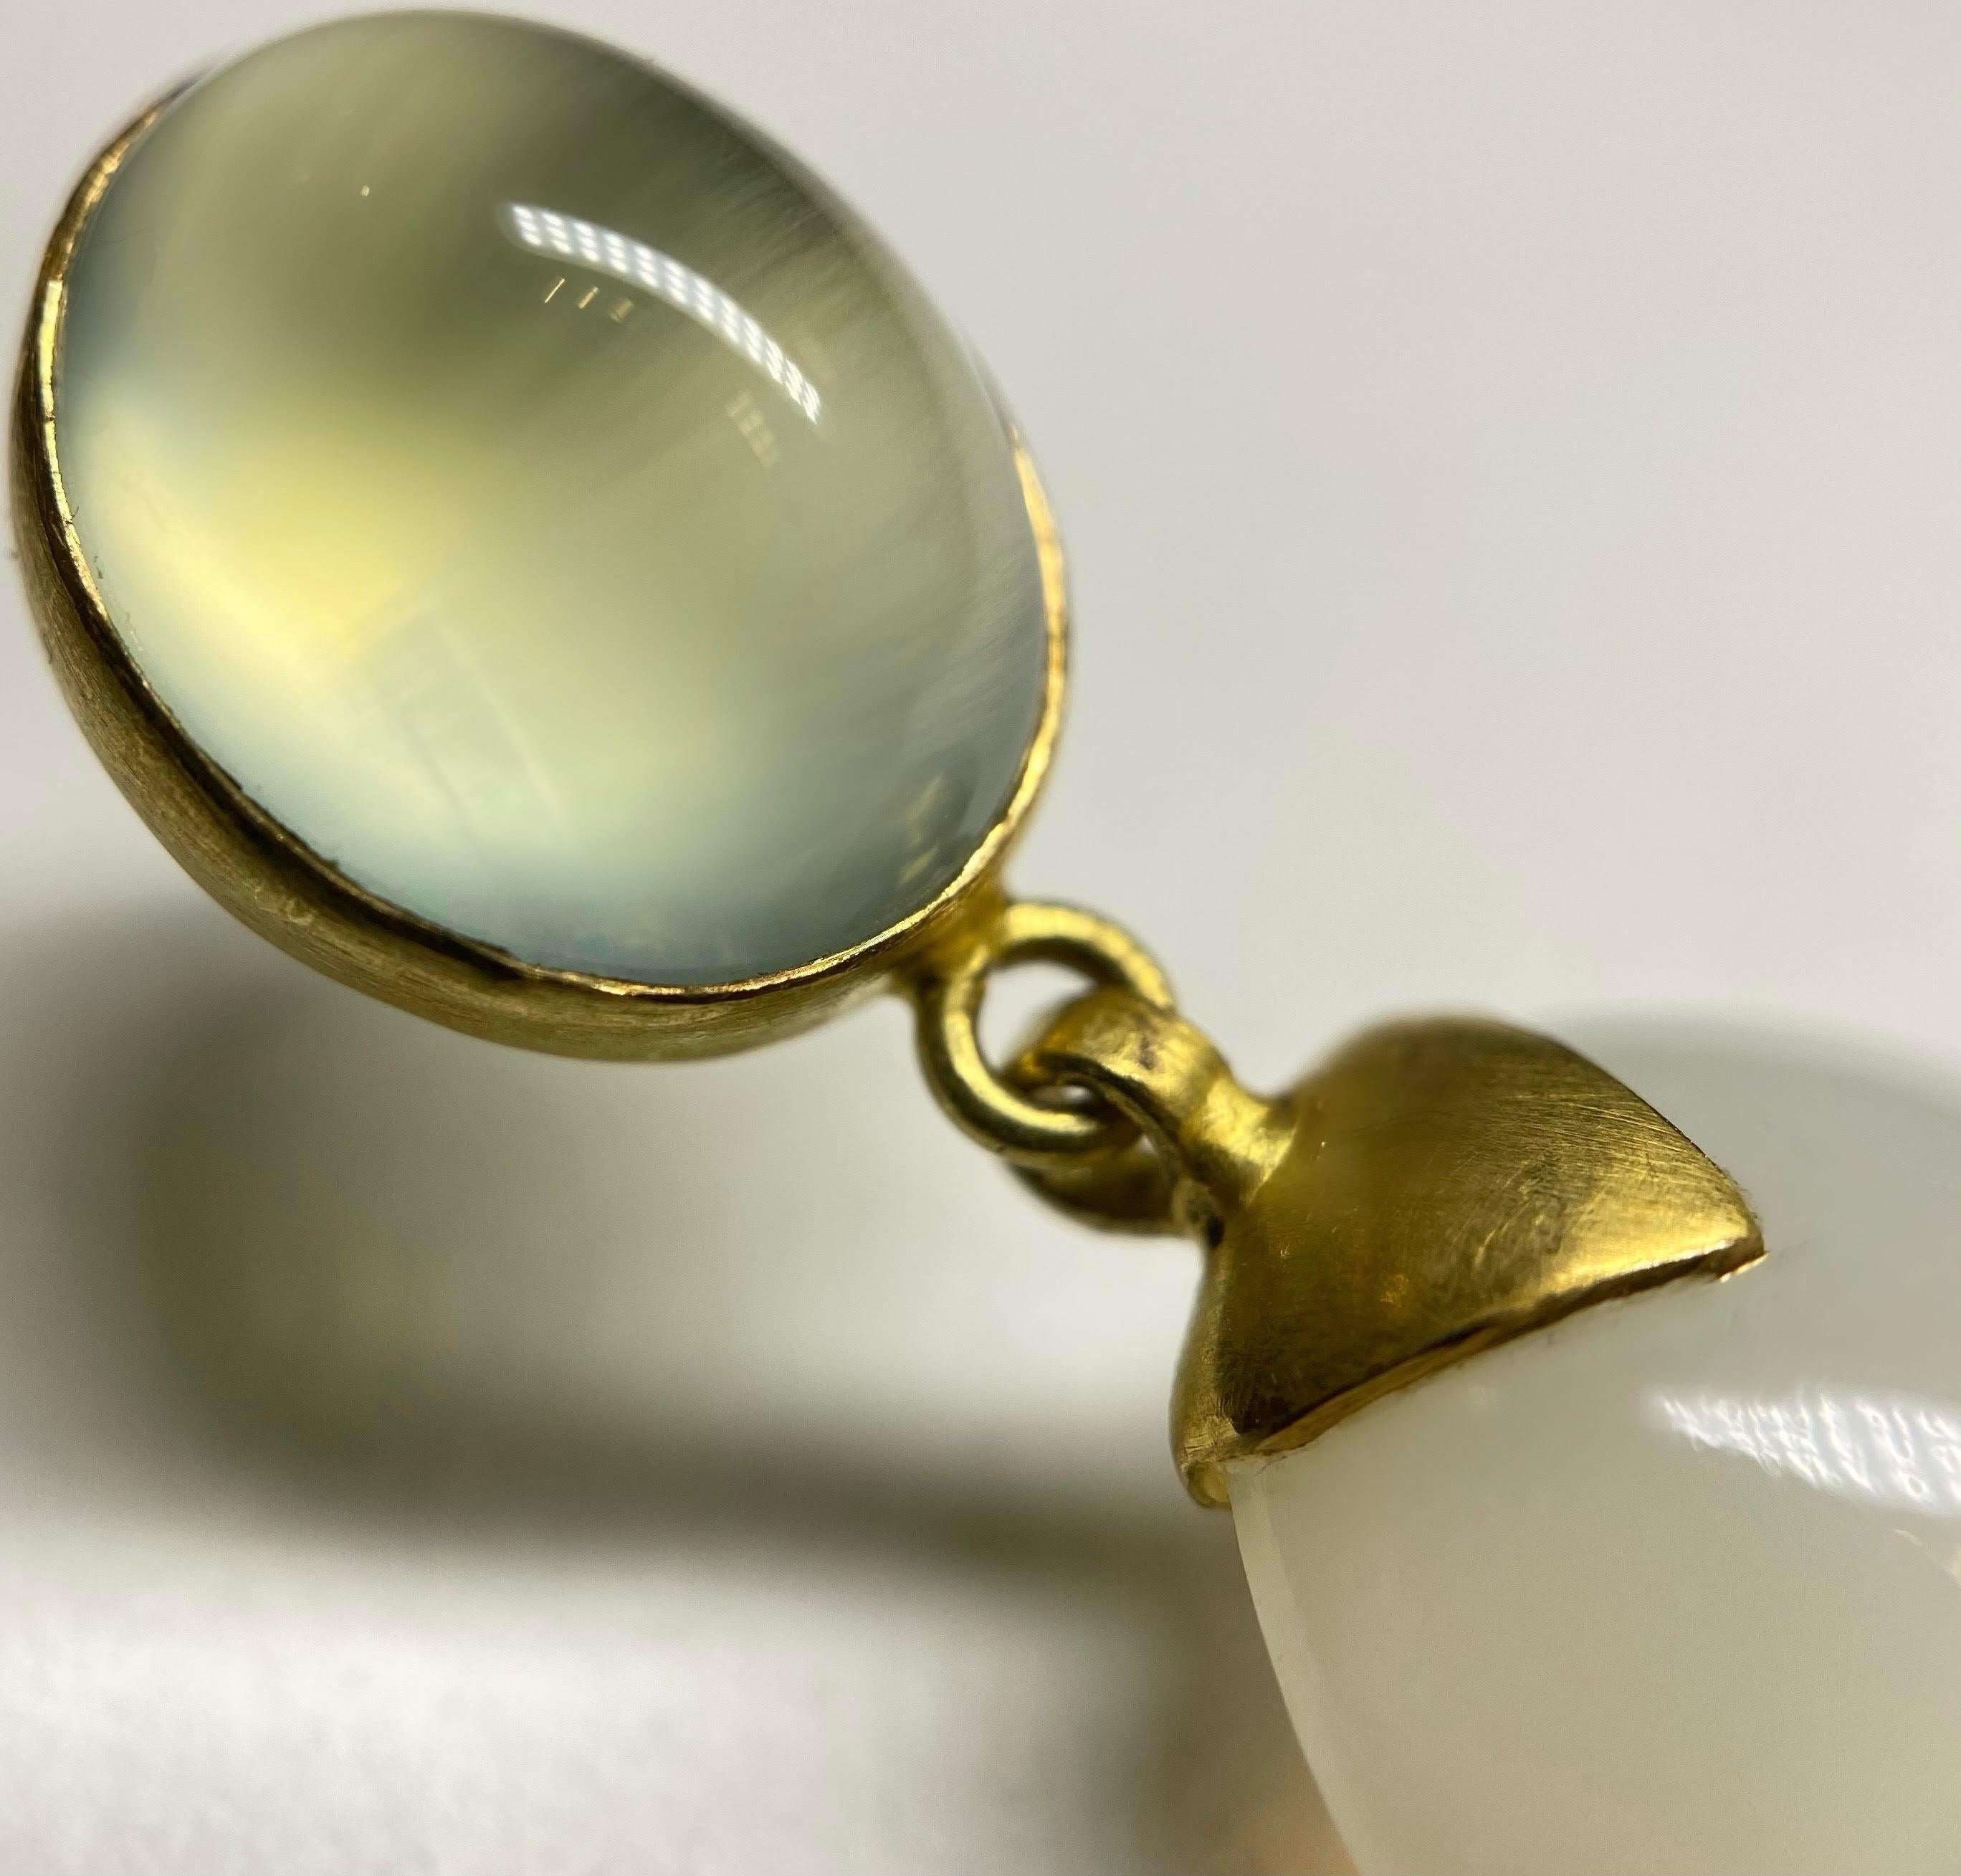 Cabochon Prehnite and White Moonstone Earrings in 18 Karat Gold, A2 by Arunashi For Sale